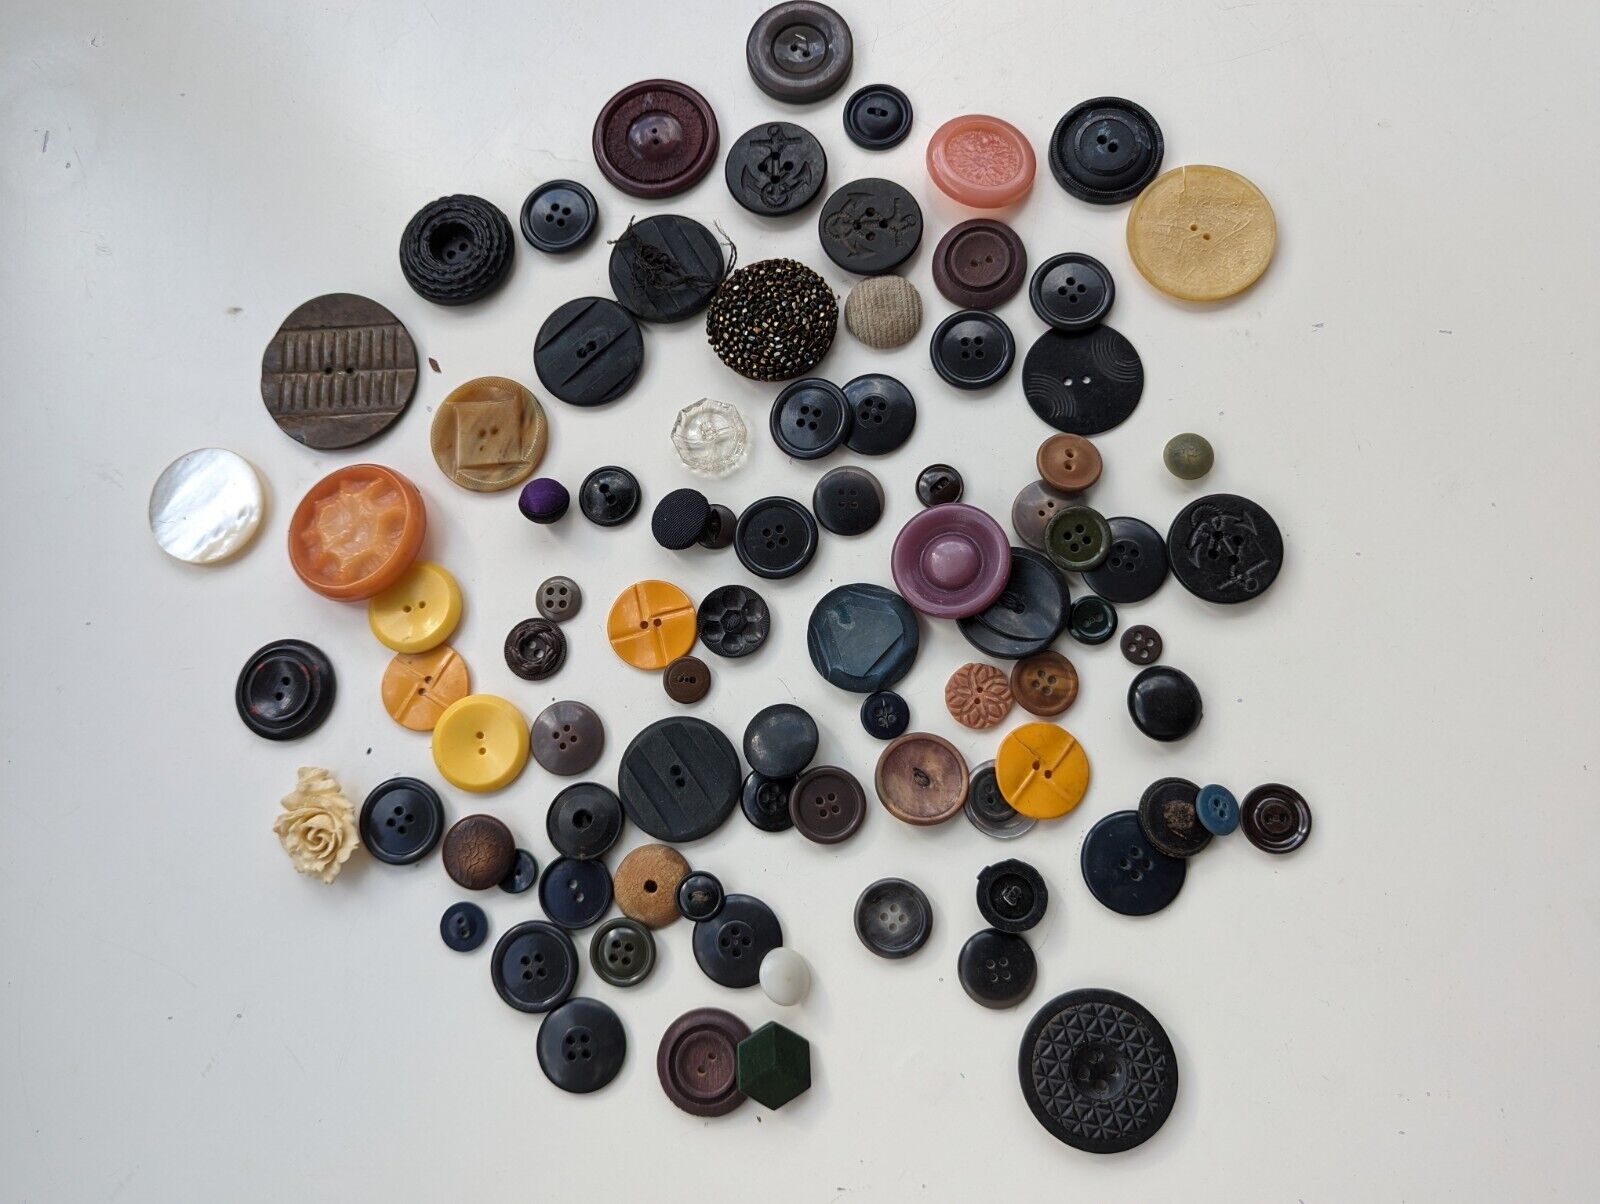 Lot Vintage Antique Mixed Buttons Varied Size Style Round Bakelite Rose Beads